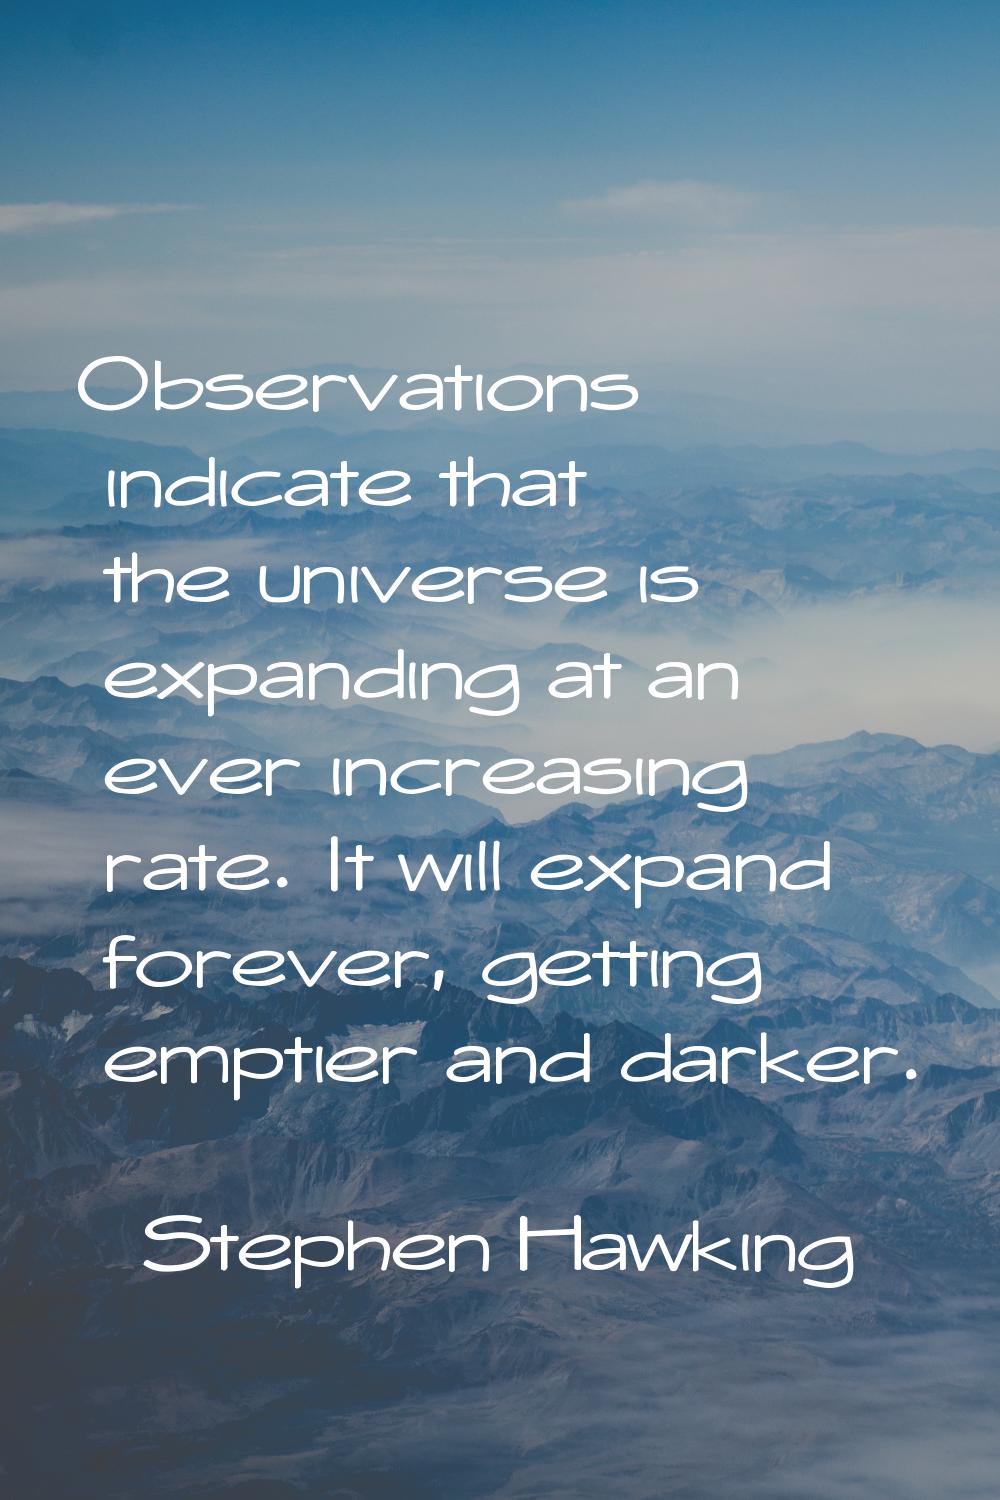 Observations indicate that the universe is expanding at an ever increasing rate. It will expand for